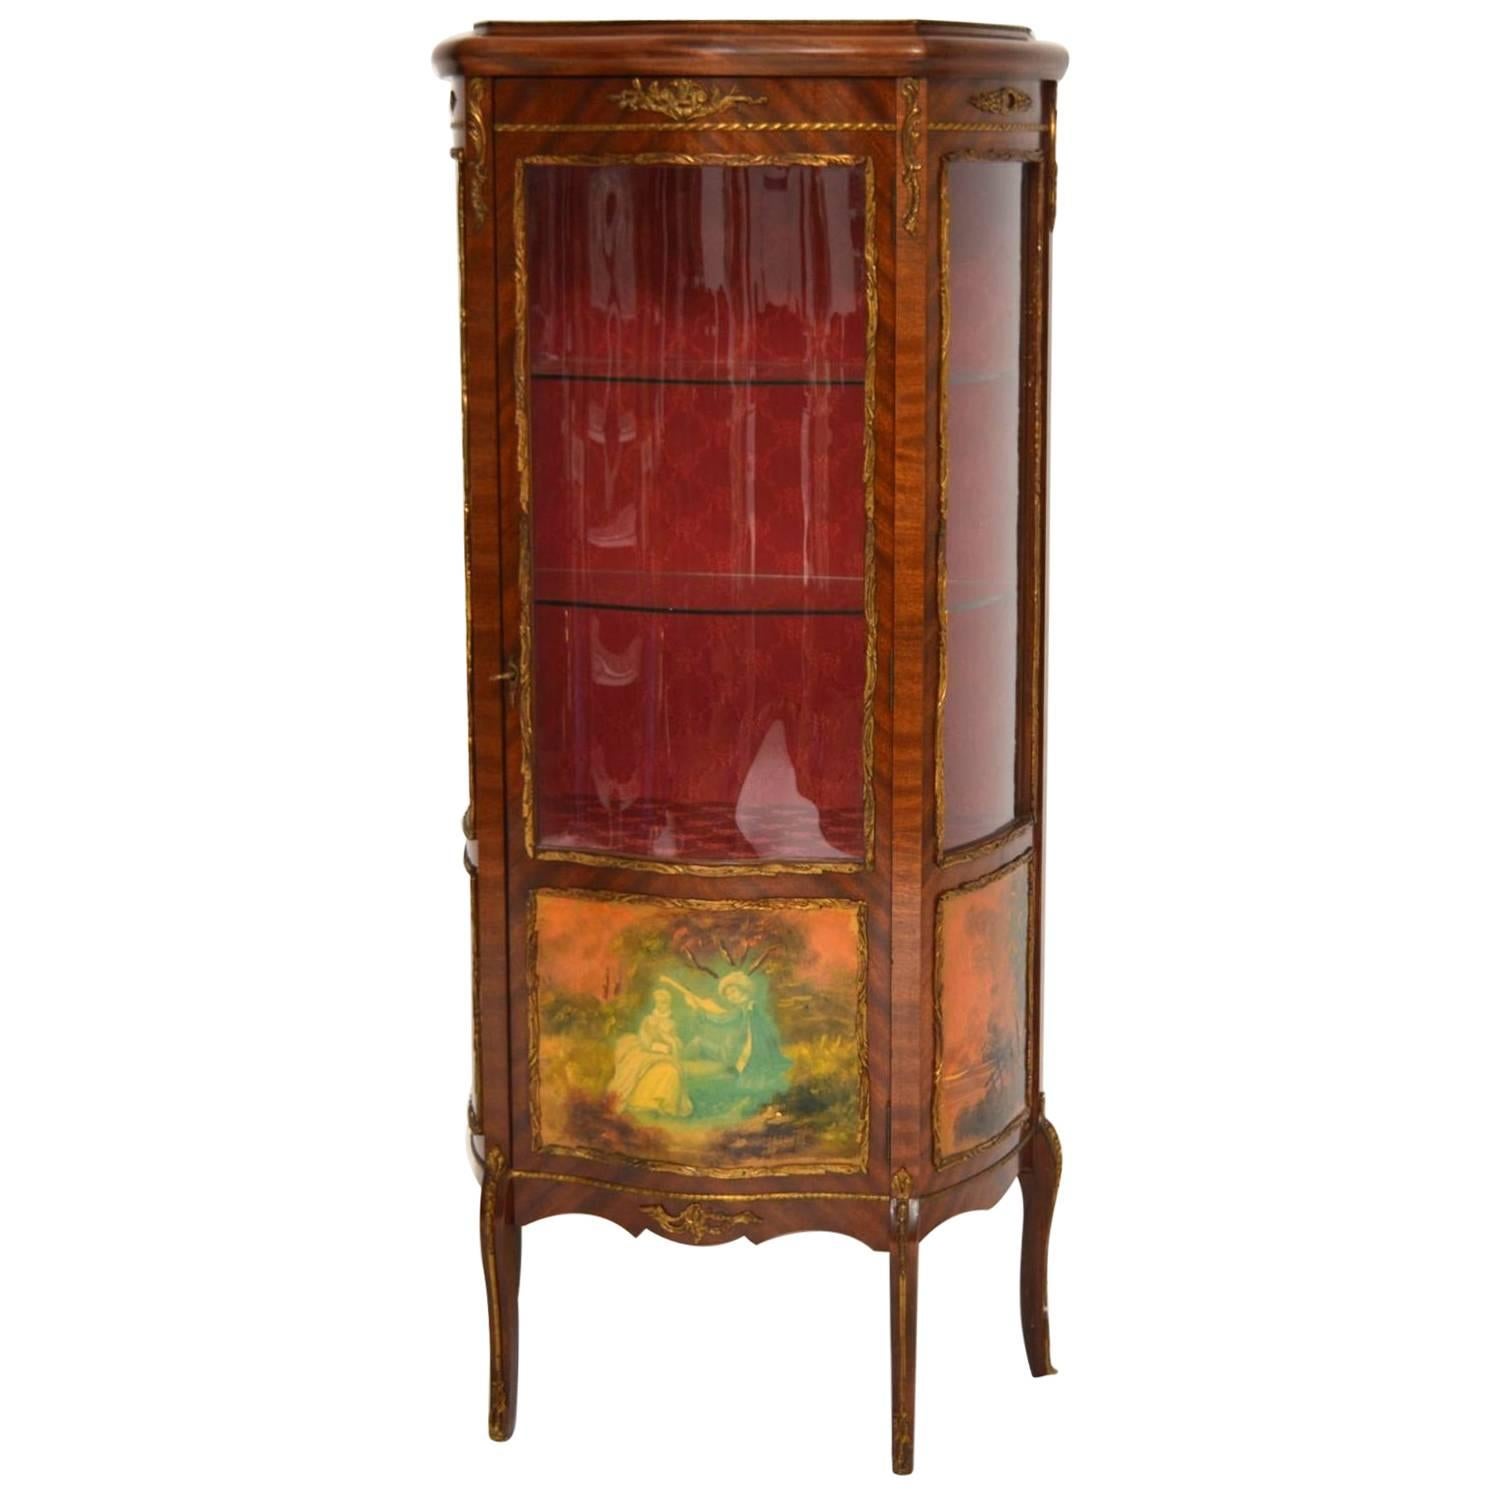 Antique French Style Ormolu-Mounted Display Cabinet